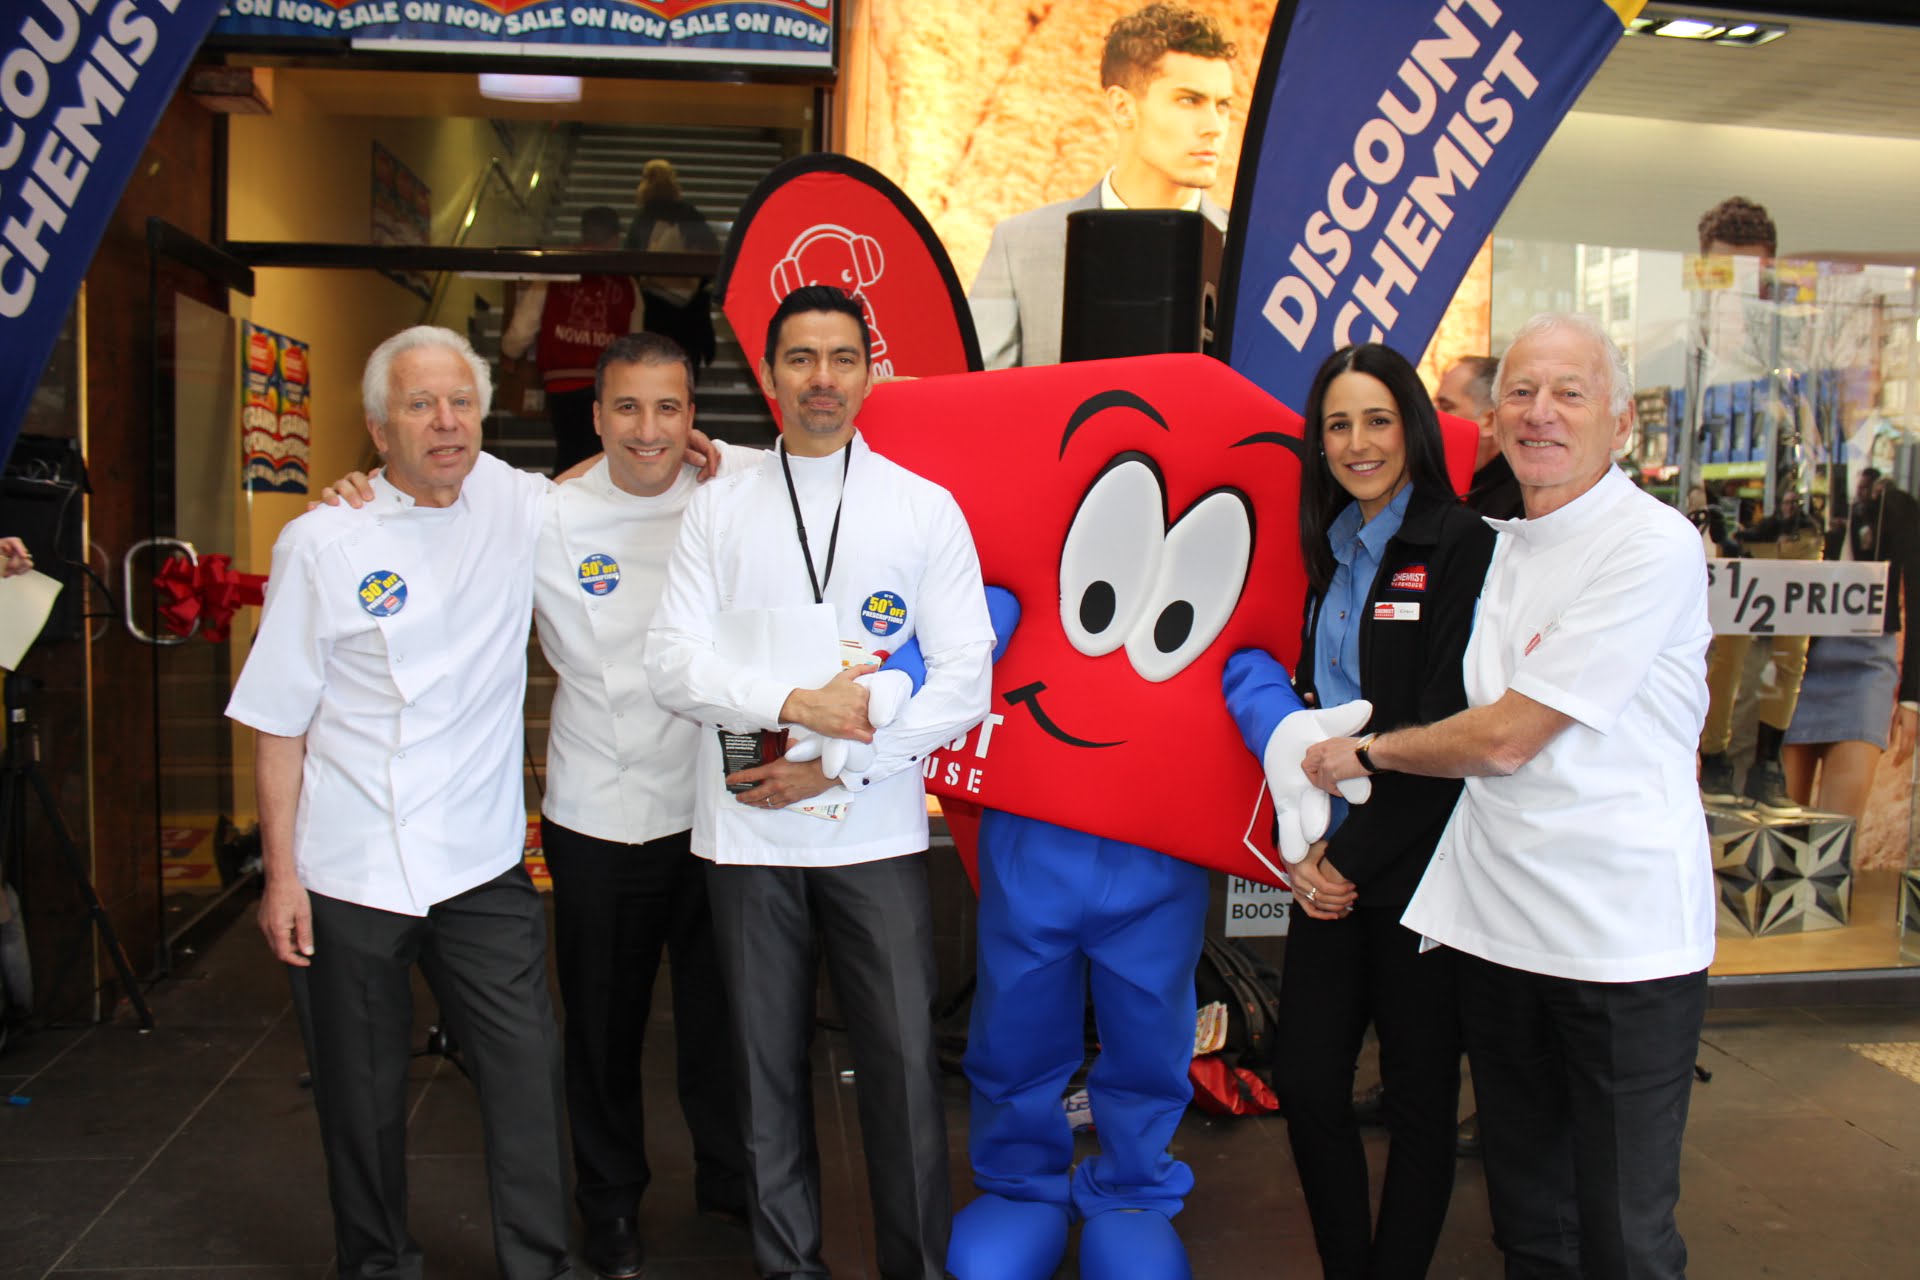 The Chemist Warehouse team at the new Bourke Street Mall store